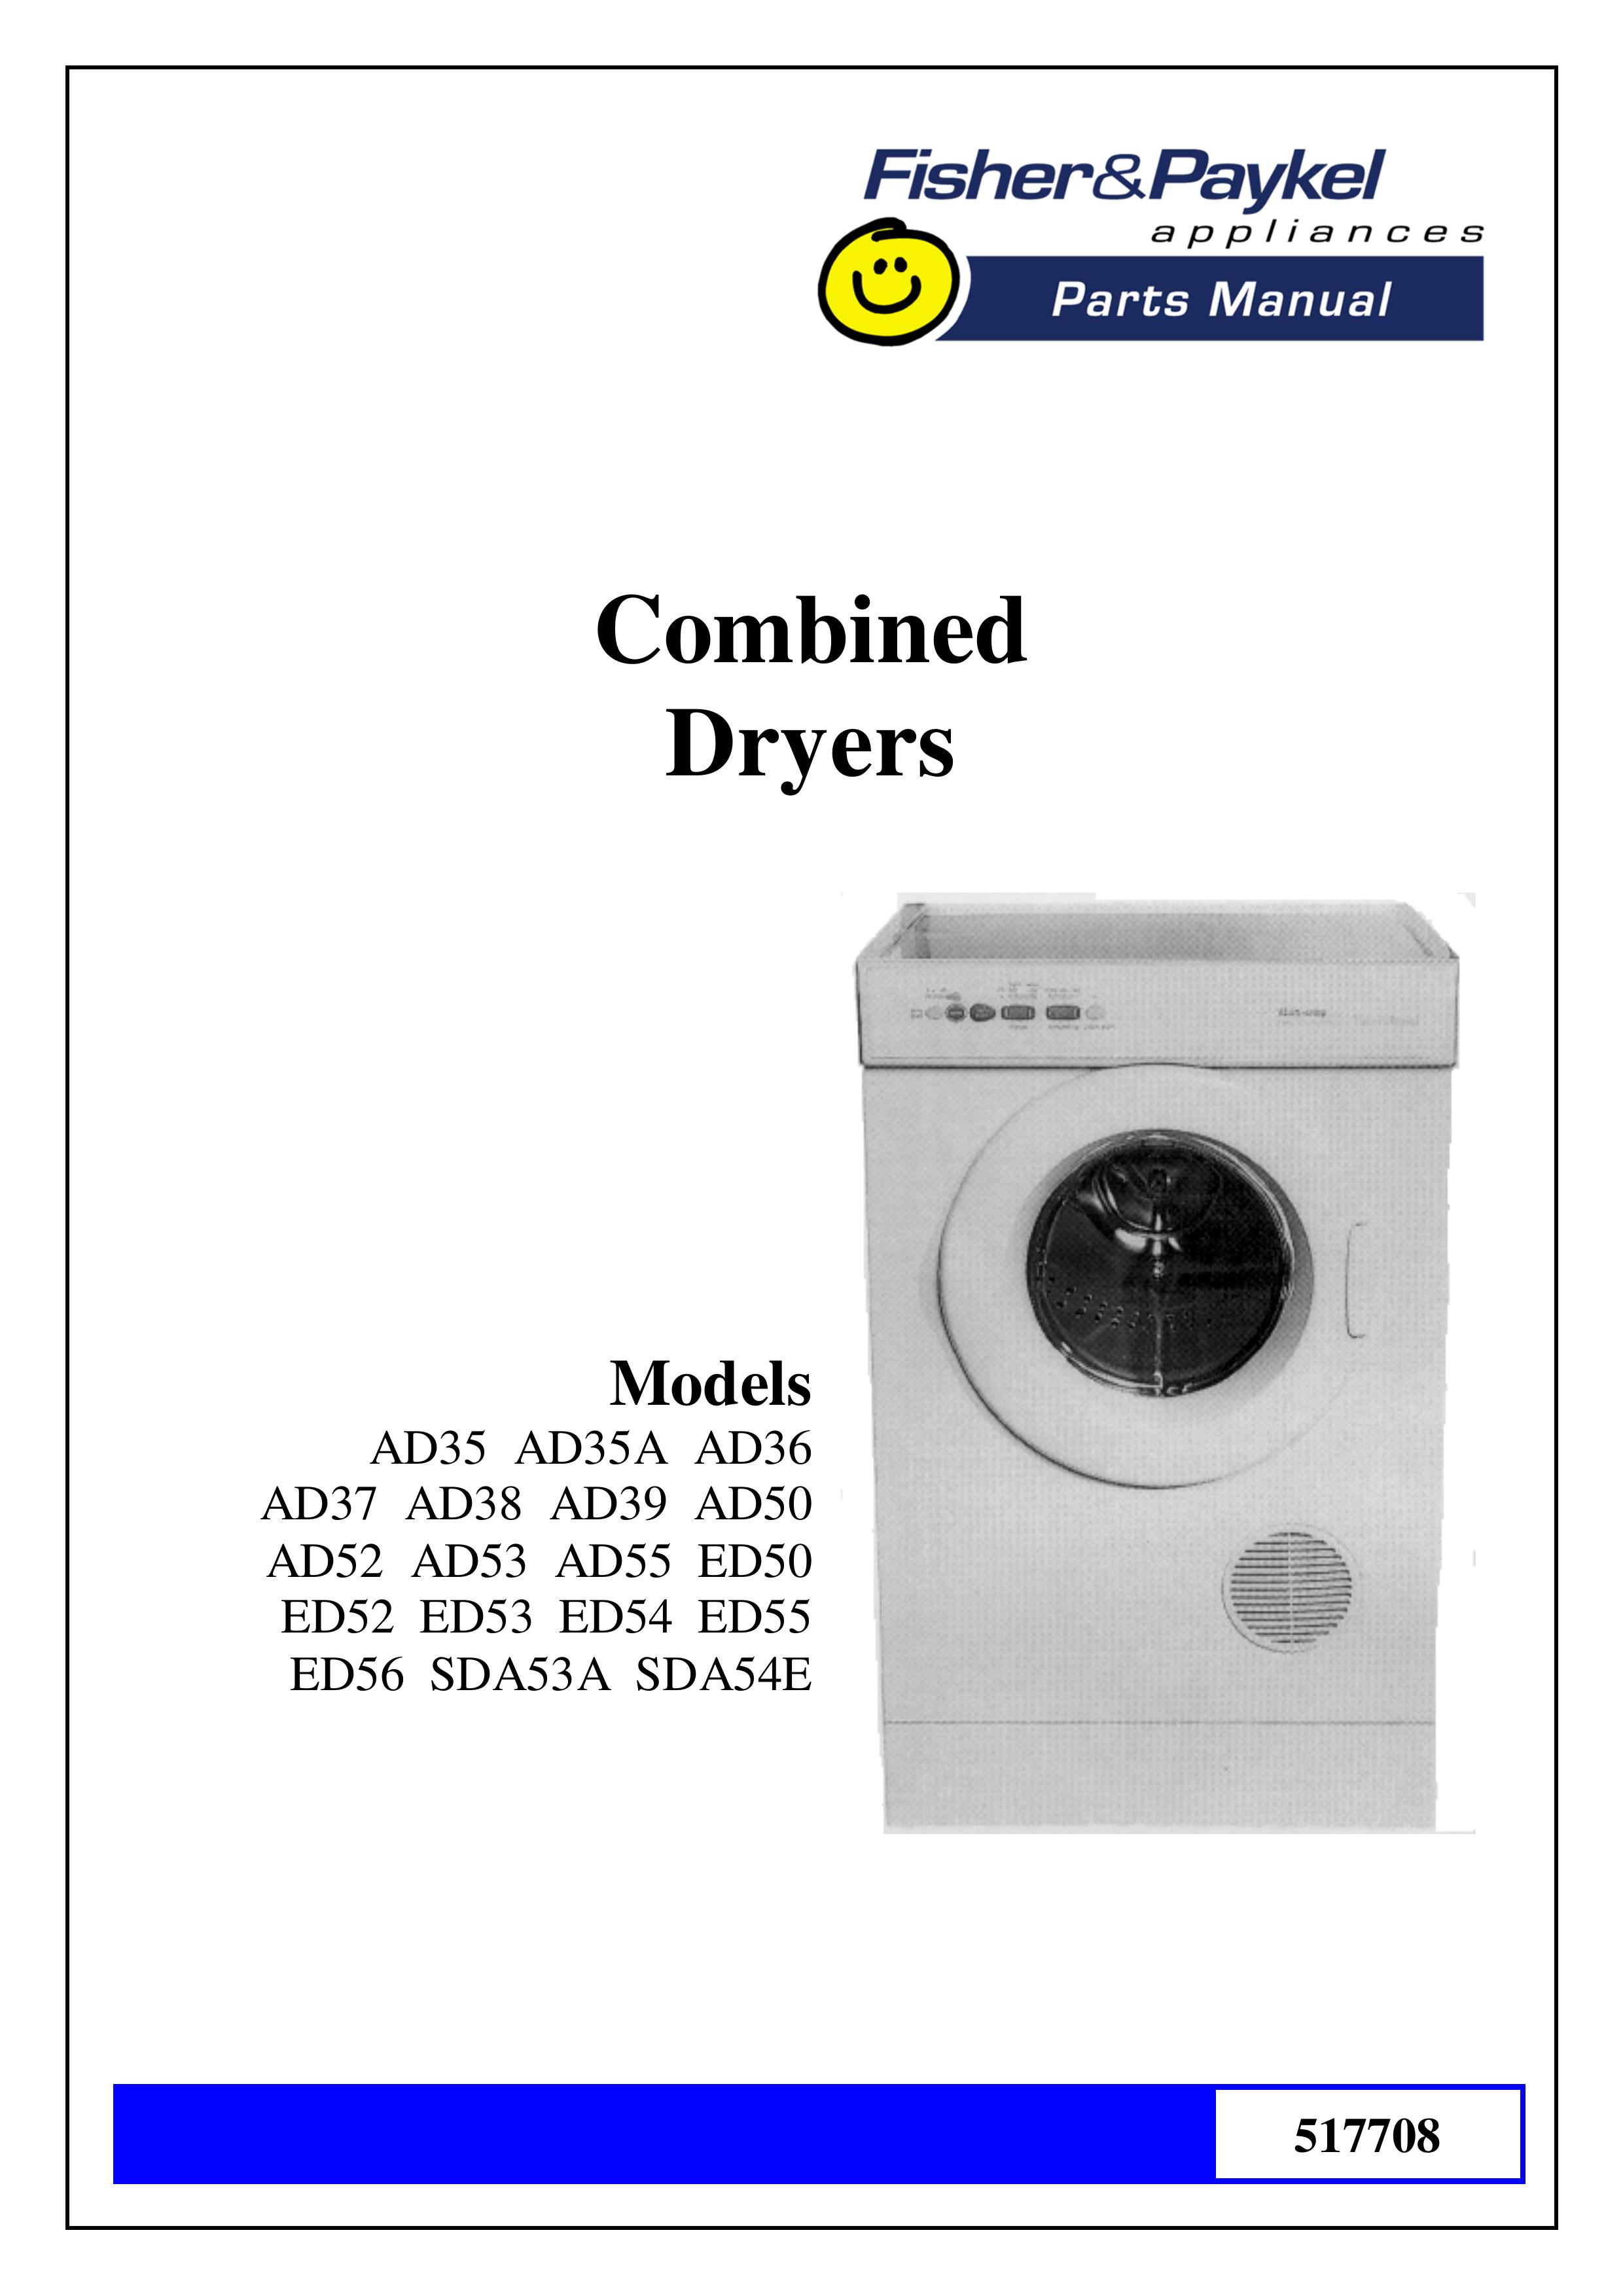 Fisher & Paykel SDA54E Clothes Dryer User Manual